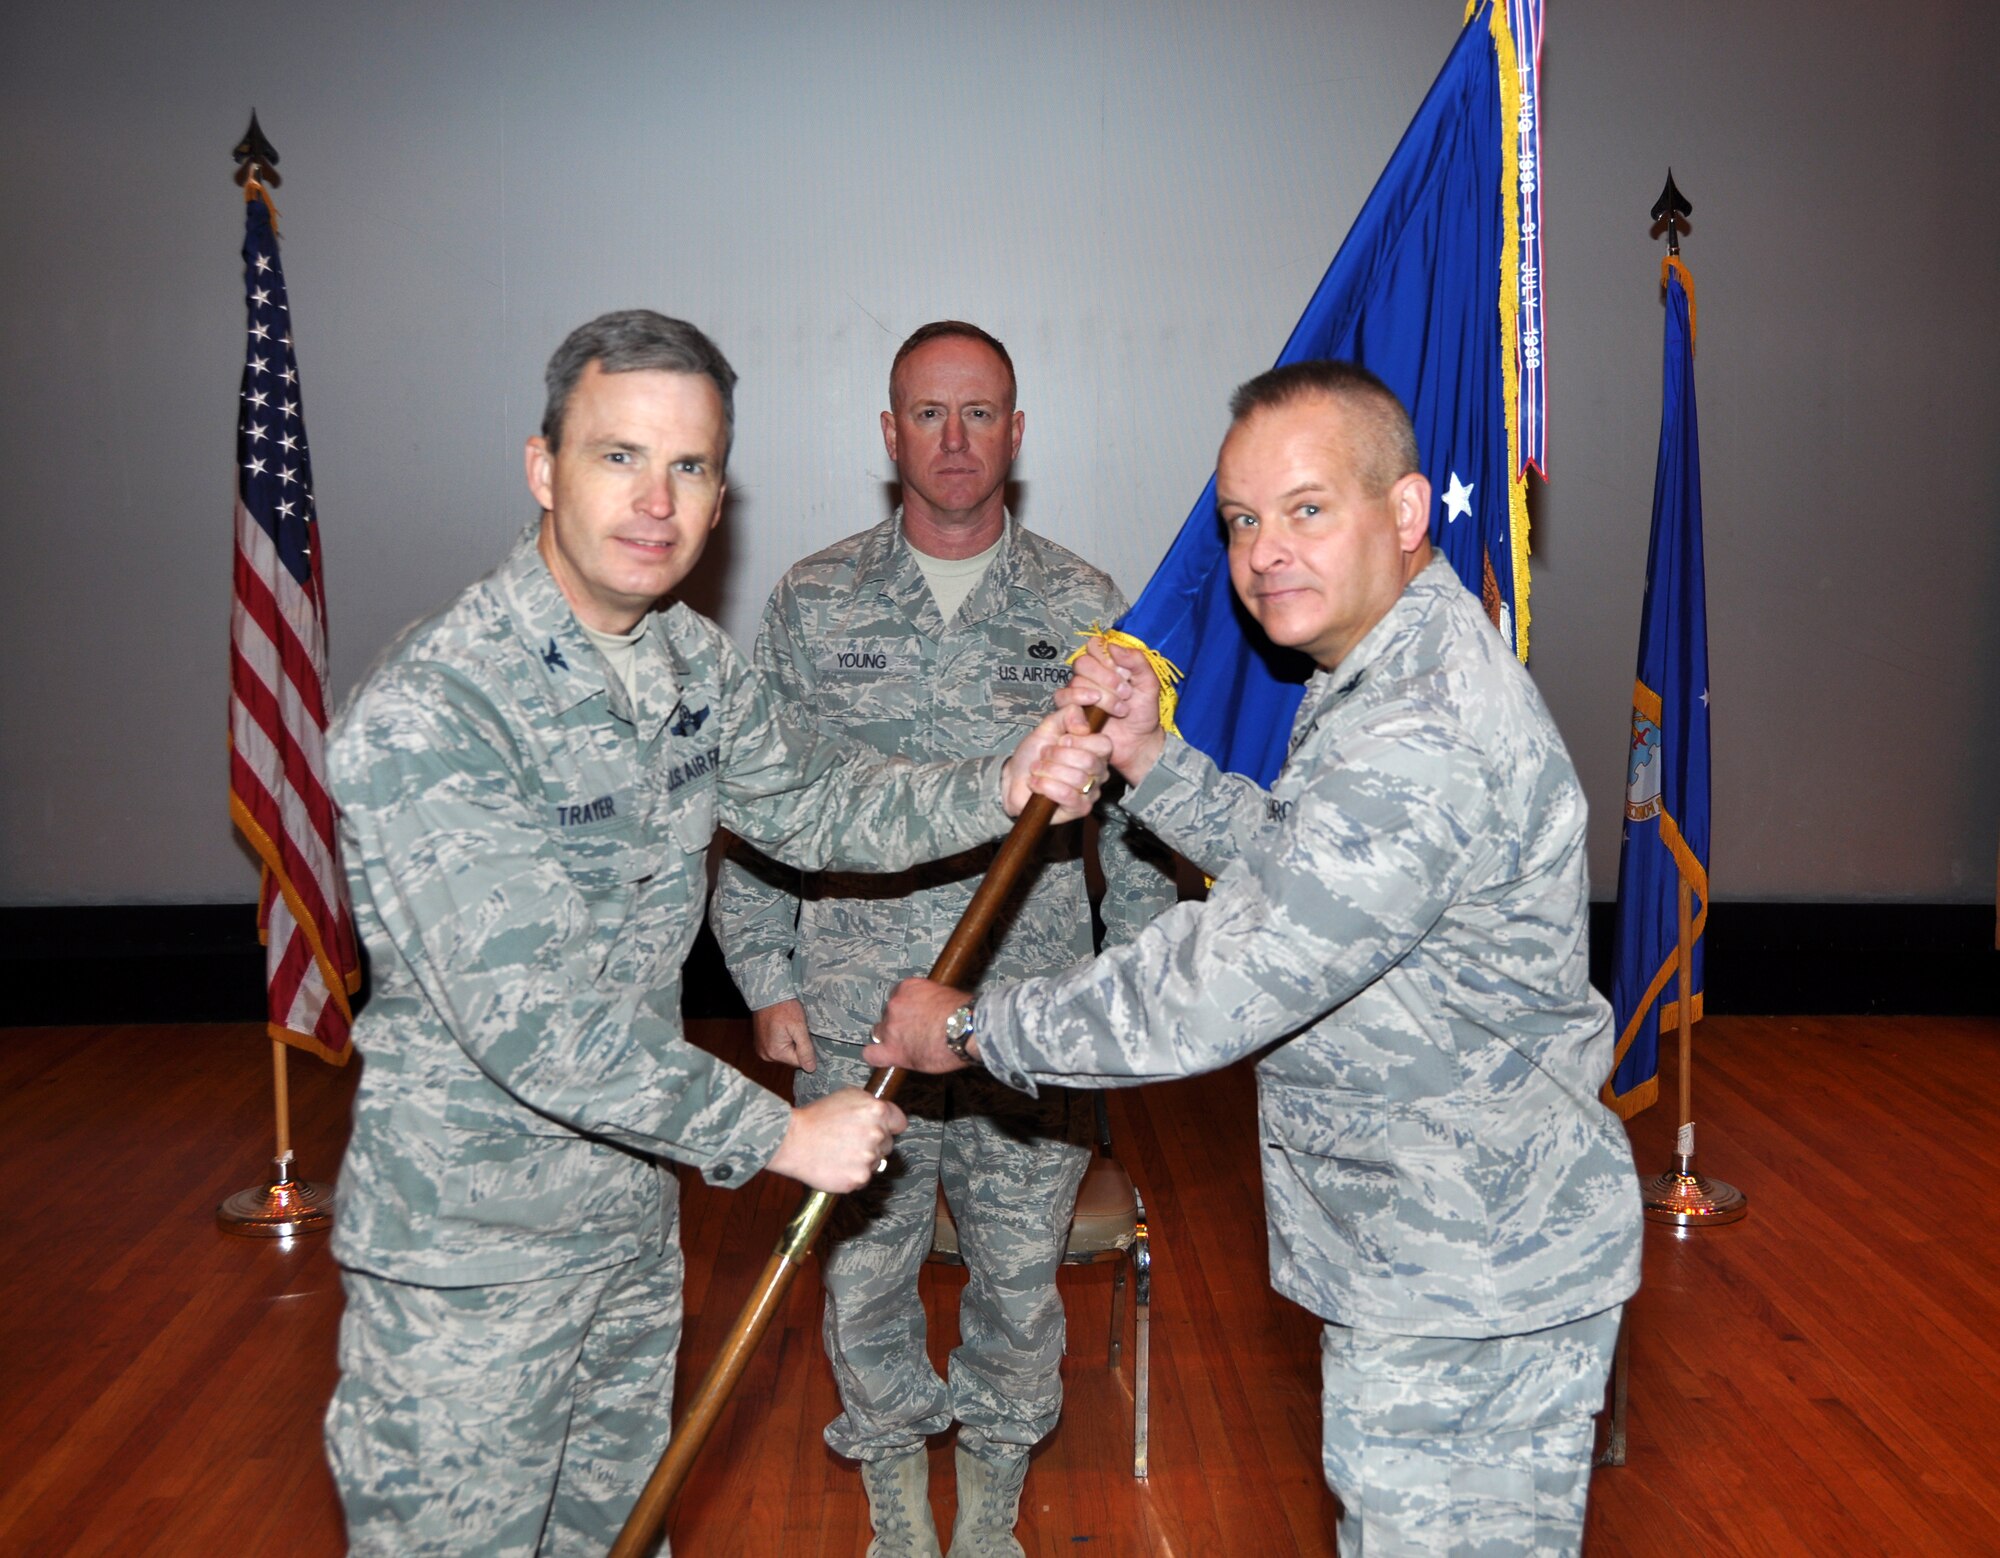 Colonel Joseph M. Revit assumes command as he receives the 507th Mission Support Group guidon from acting 507th Air Refueling Wing commander, Col. Kevin Trayer. (U.S. Air Force Photo/Senior Airman Mark Hybers)    